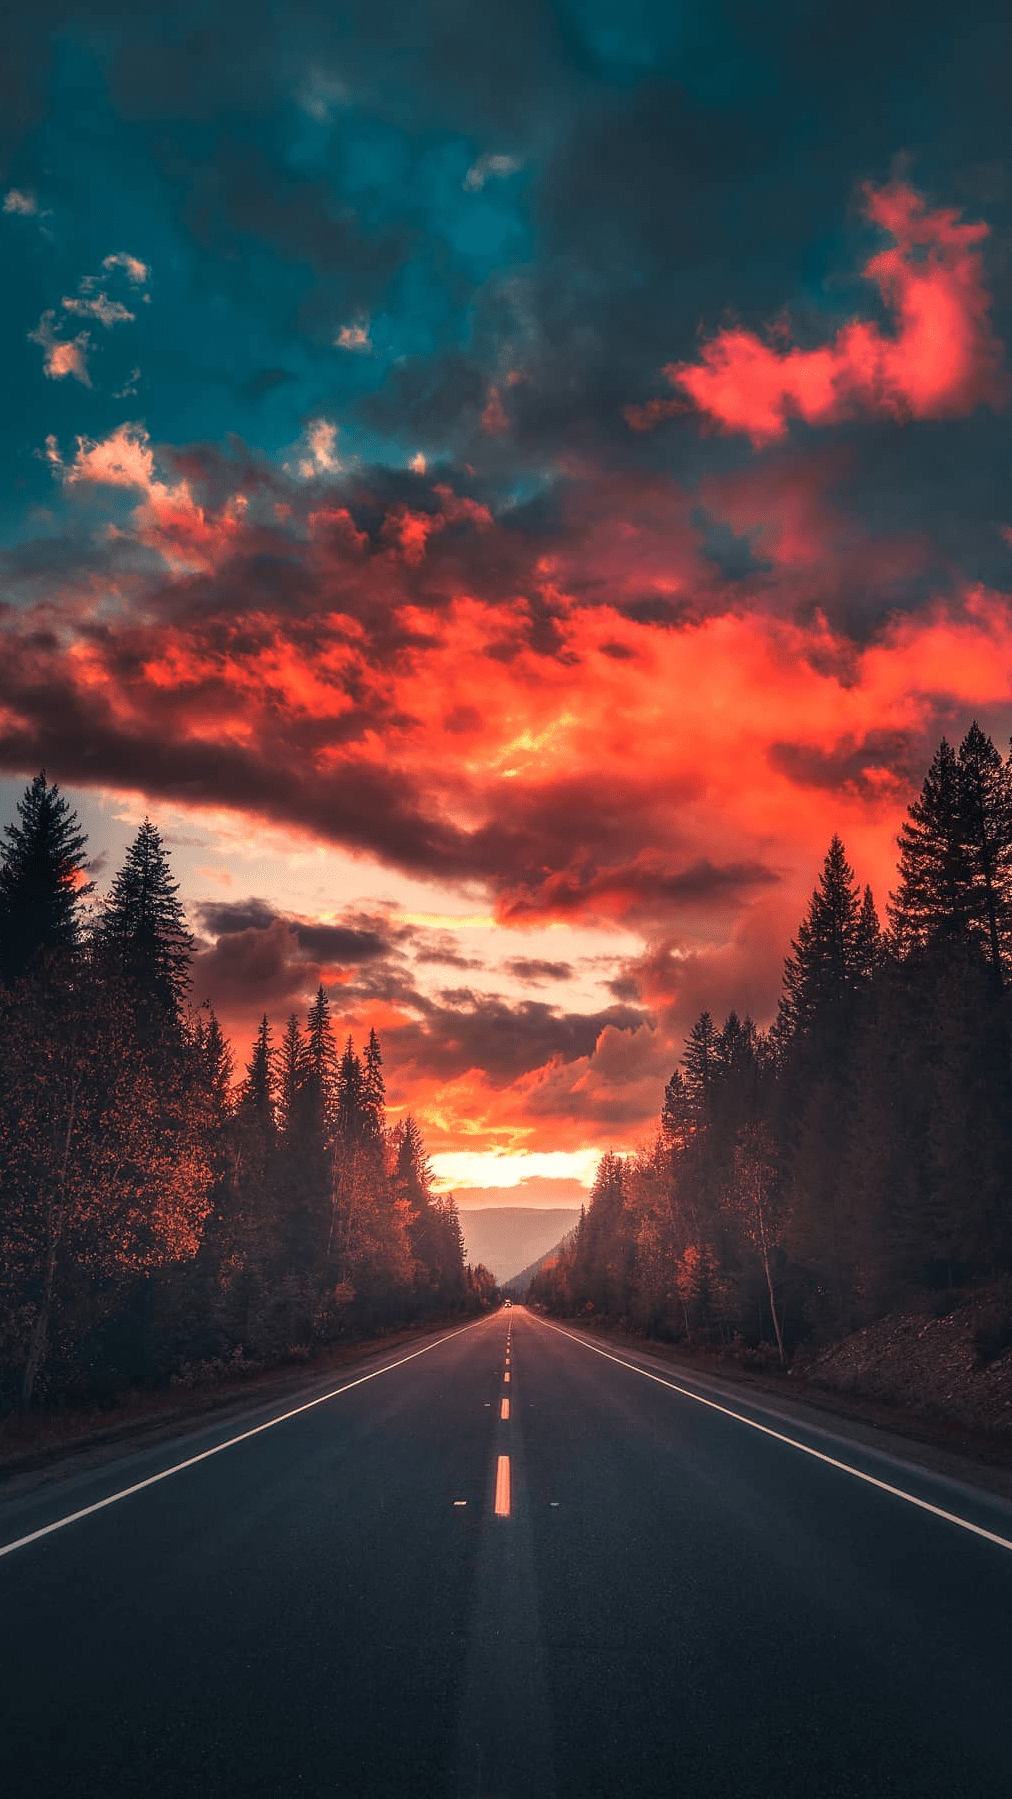 A beautiful road in the middle of the forest with a dramatic sunset in the background. - Scenery